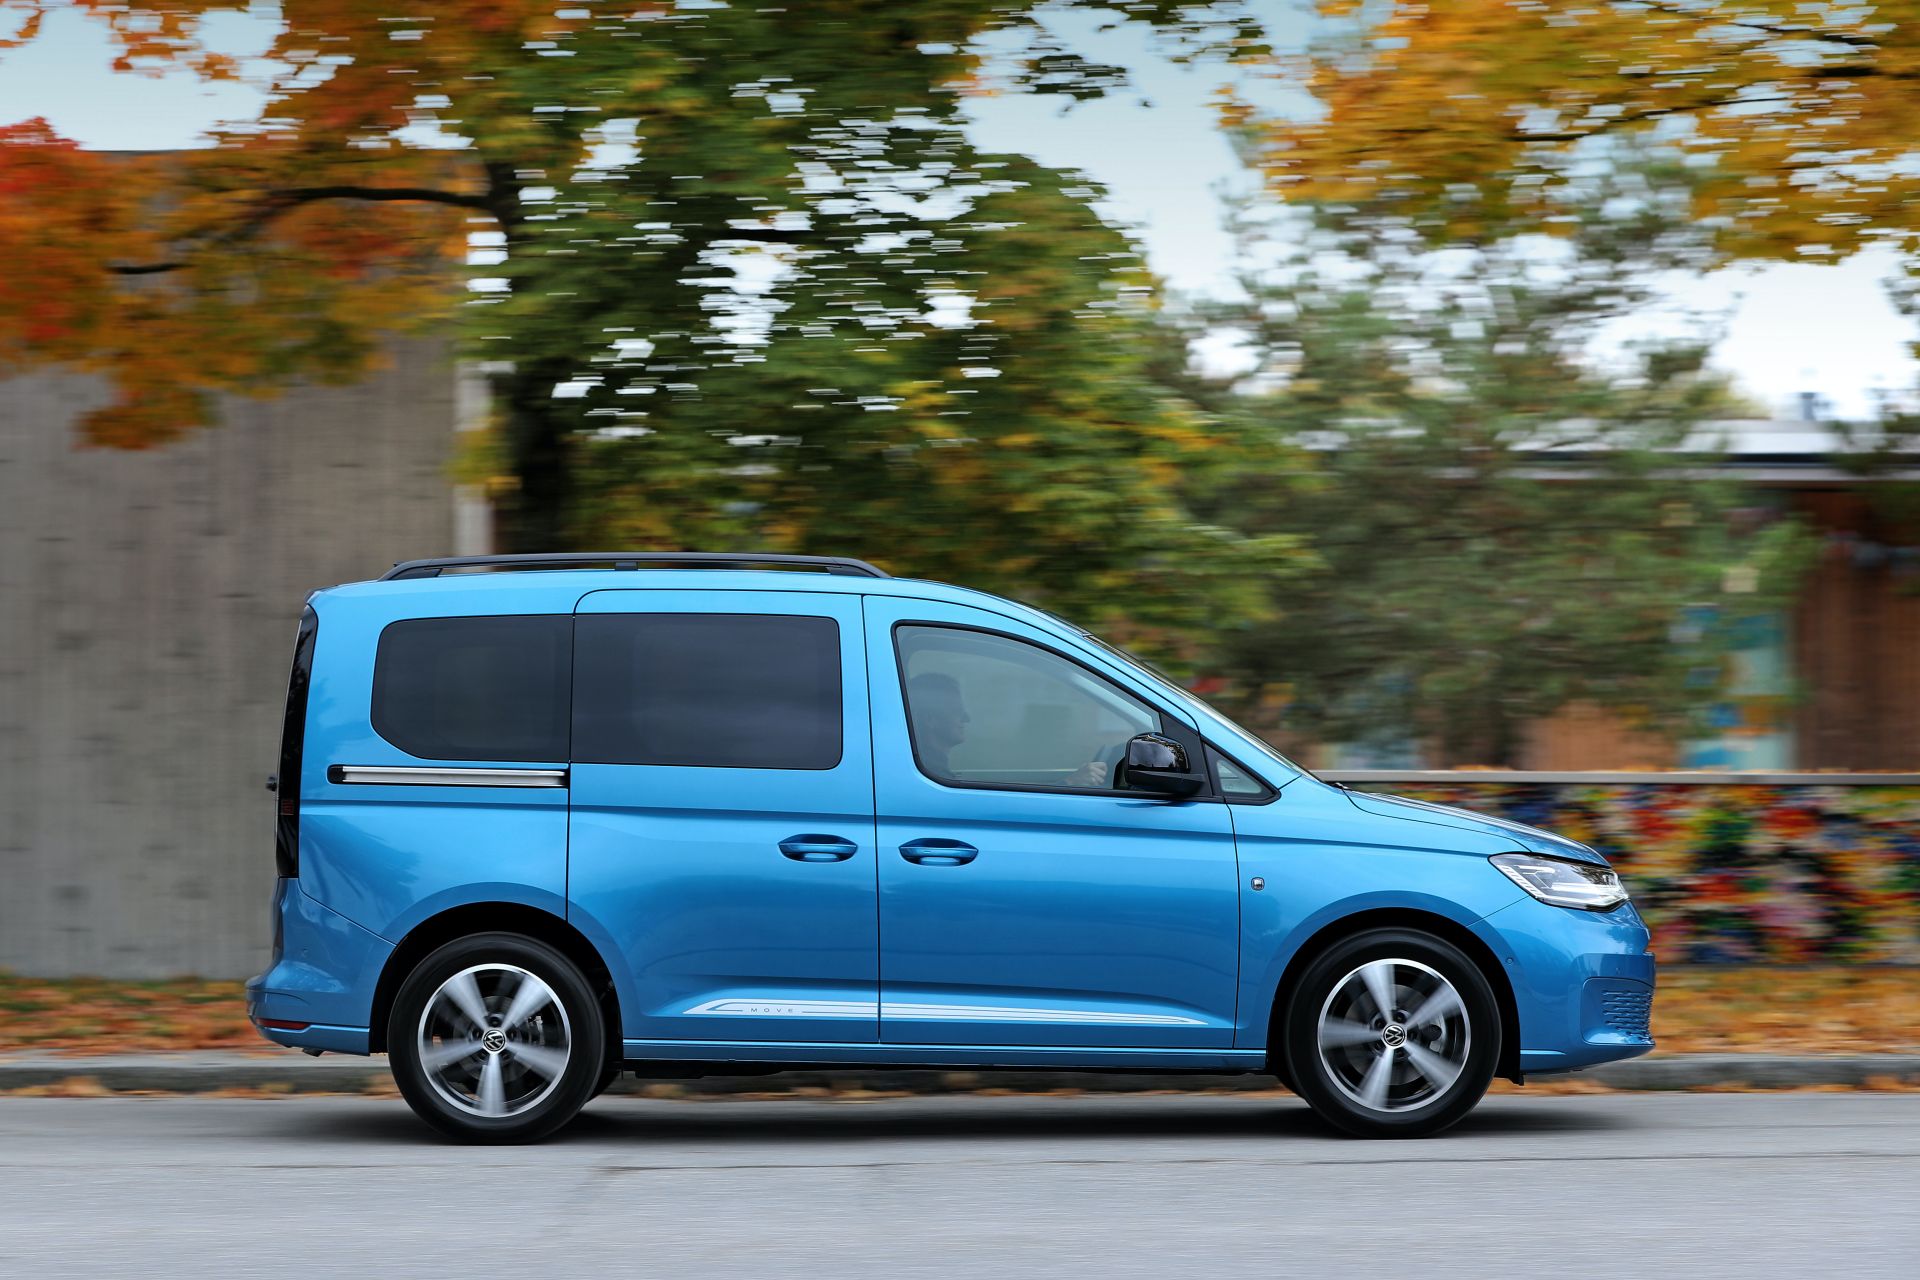 2021 Volkswagen Caddy Light Commercial Vehicle Priced From ...